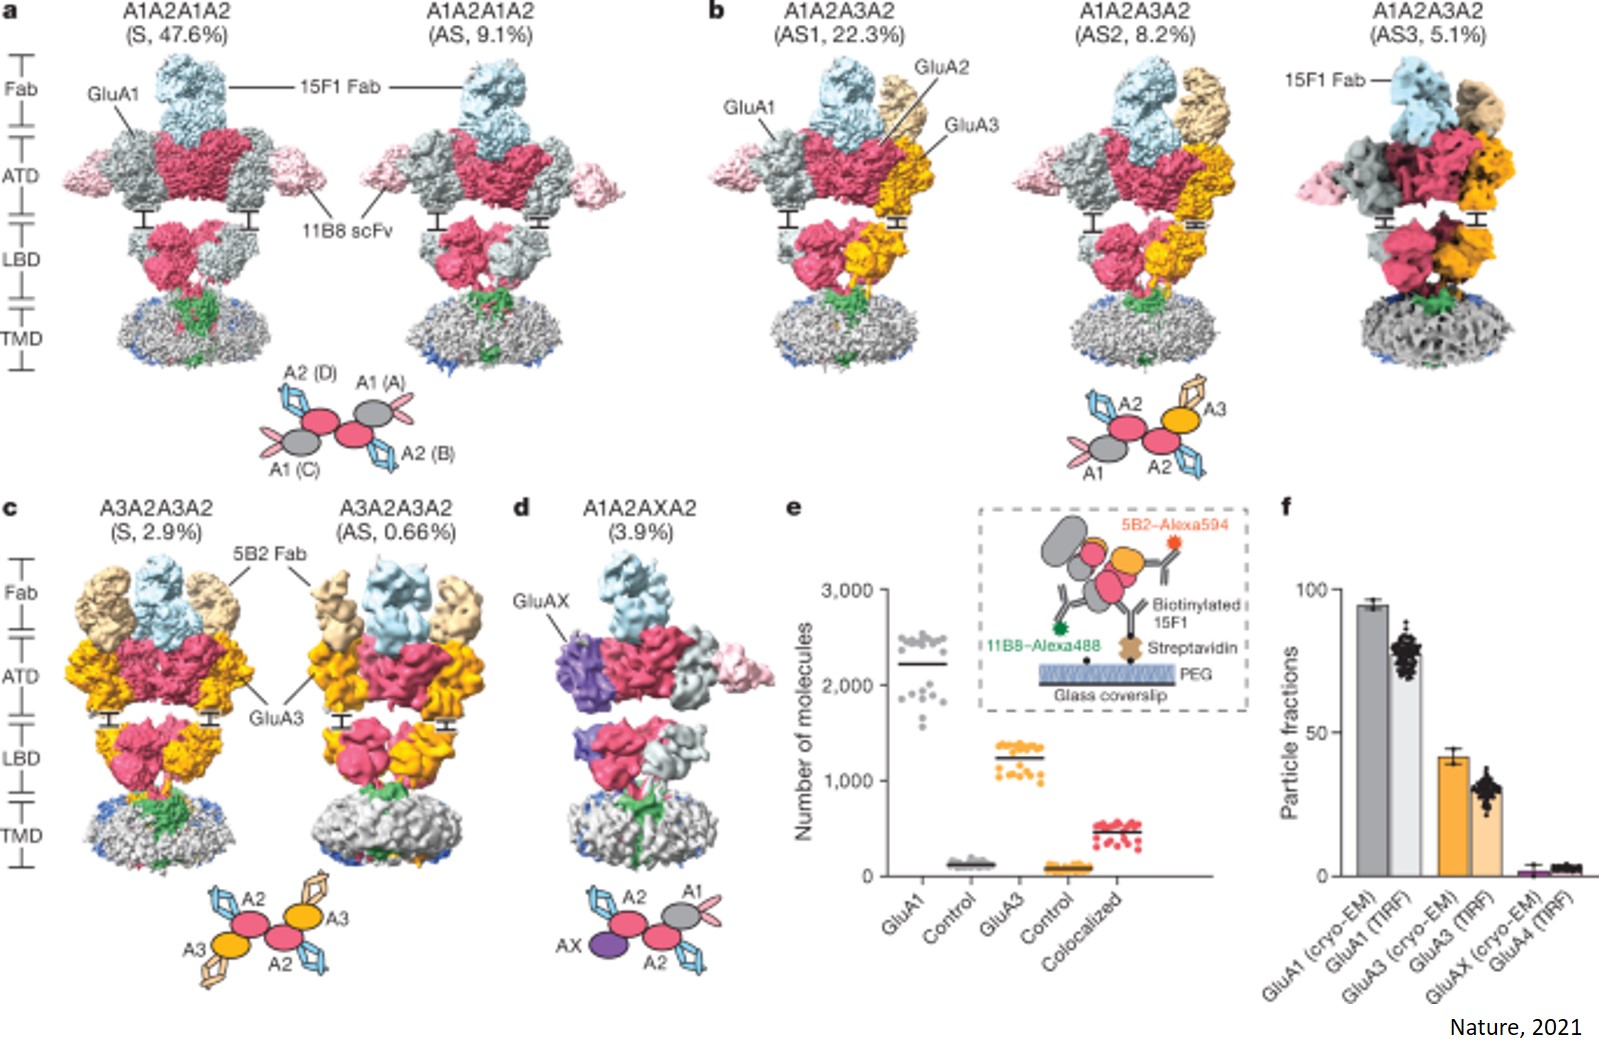 Structure of hippocampal AMPA receptor assemblies involved in memory and learning 